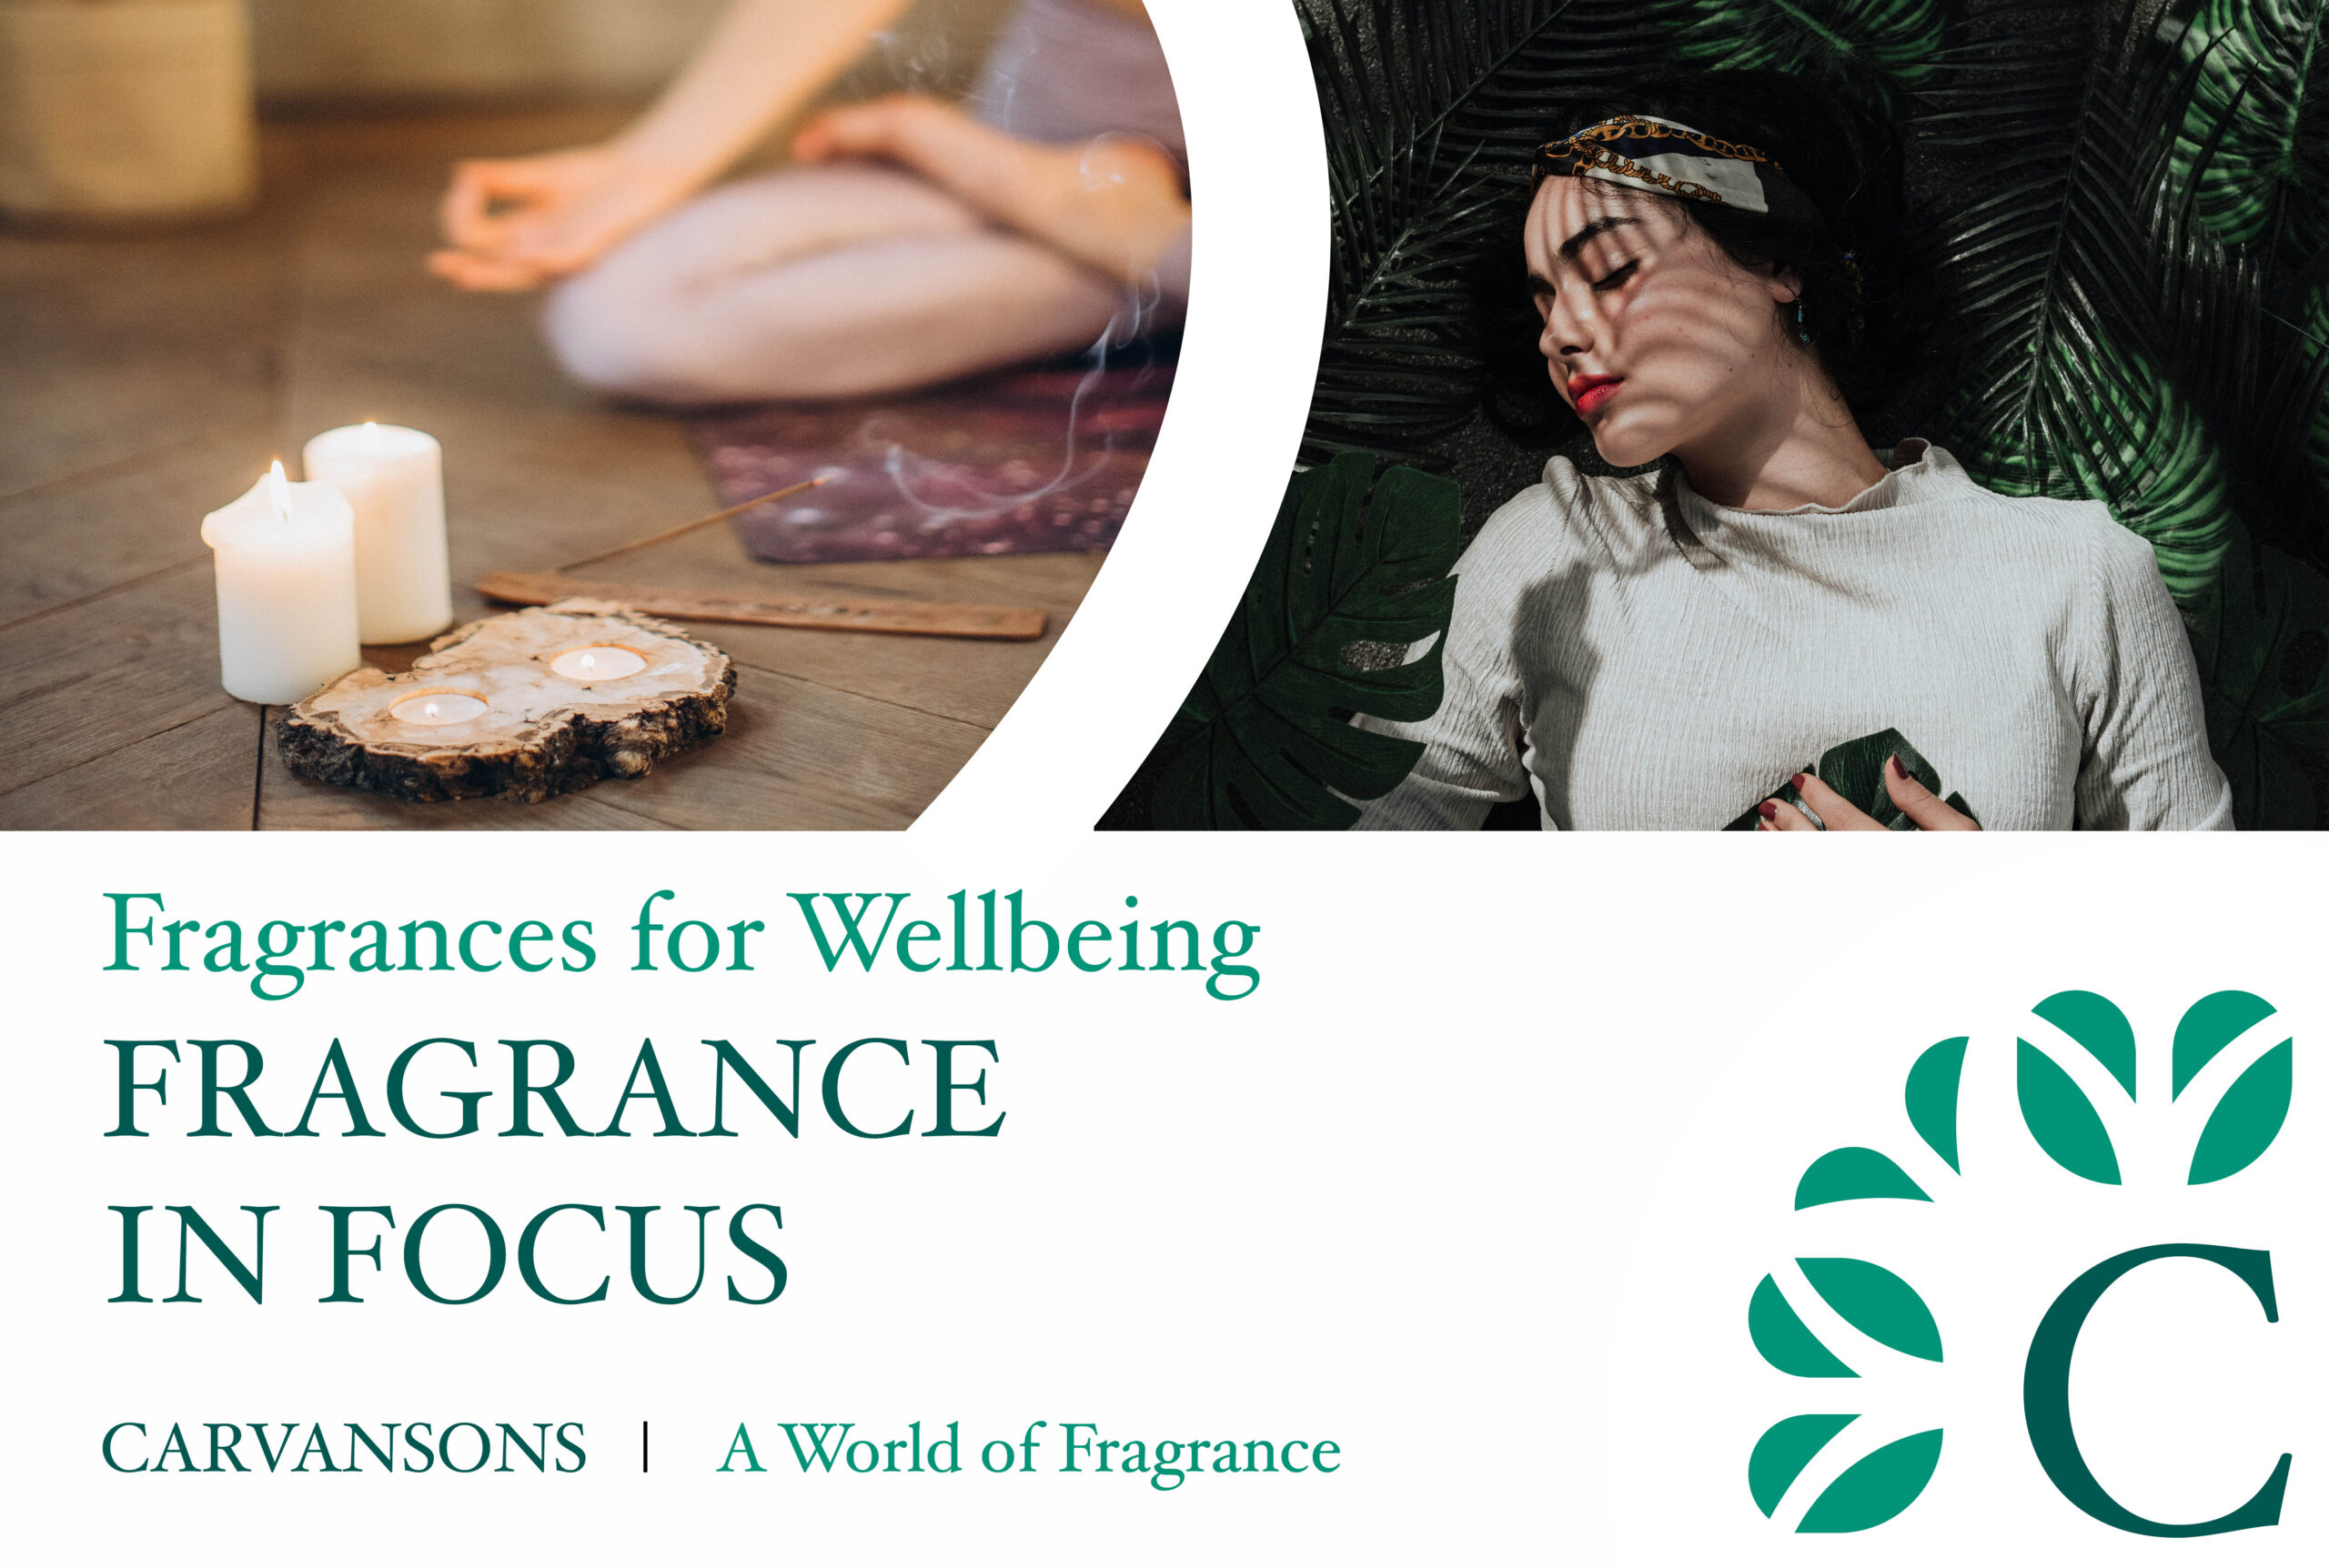 Fragrances for Wellbeing